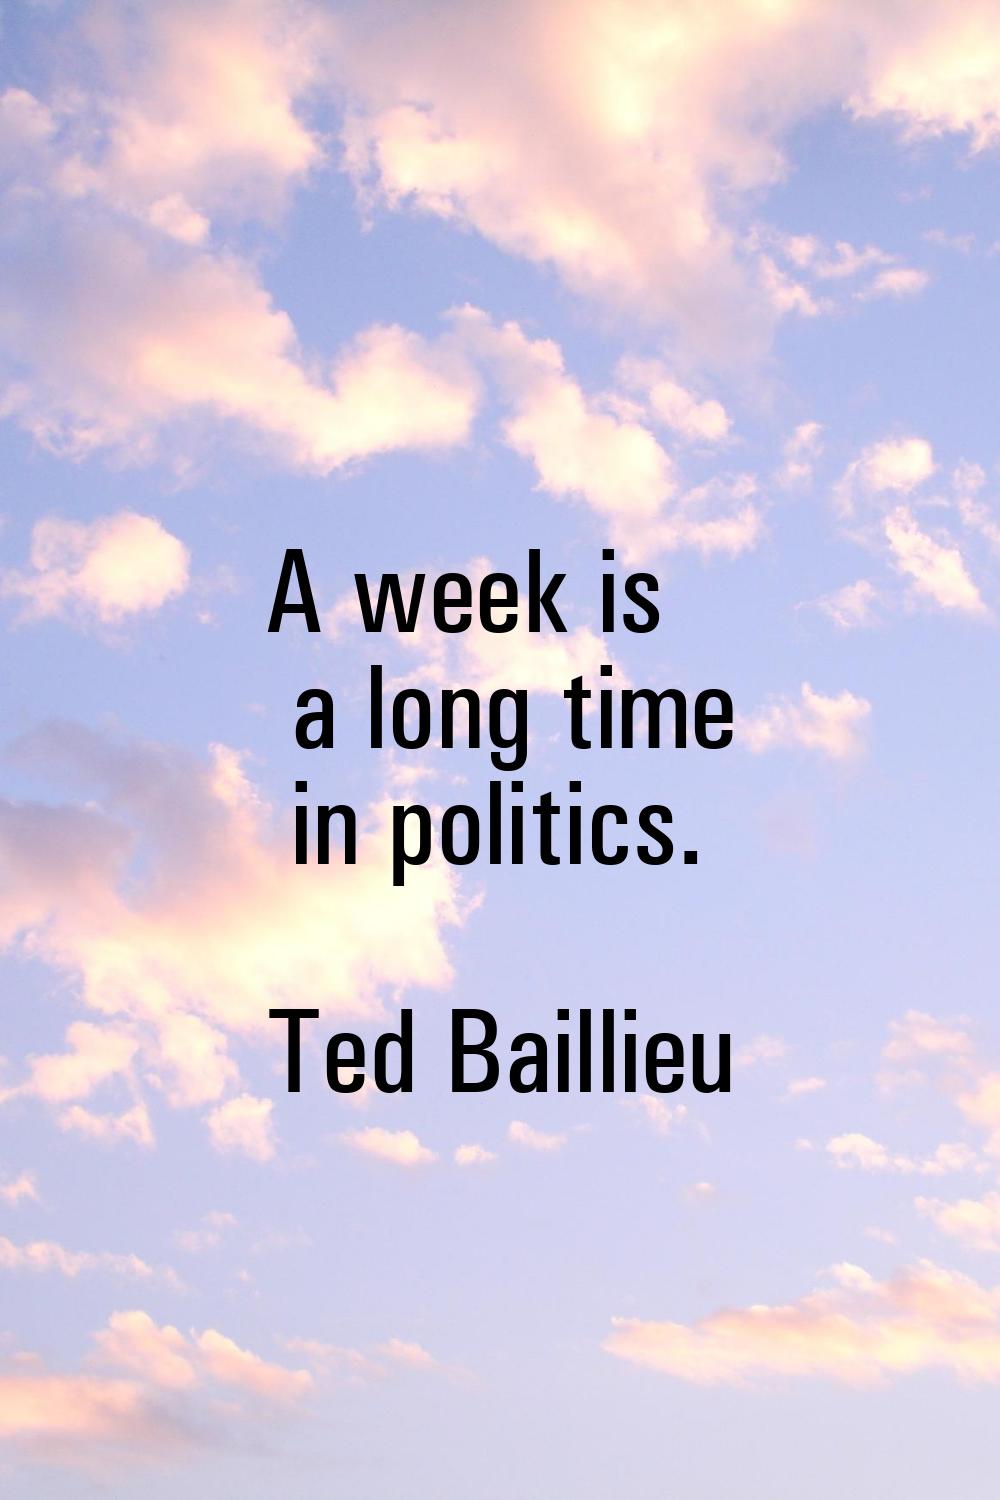 A week is a long time in politics.